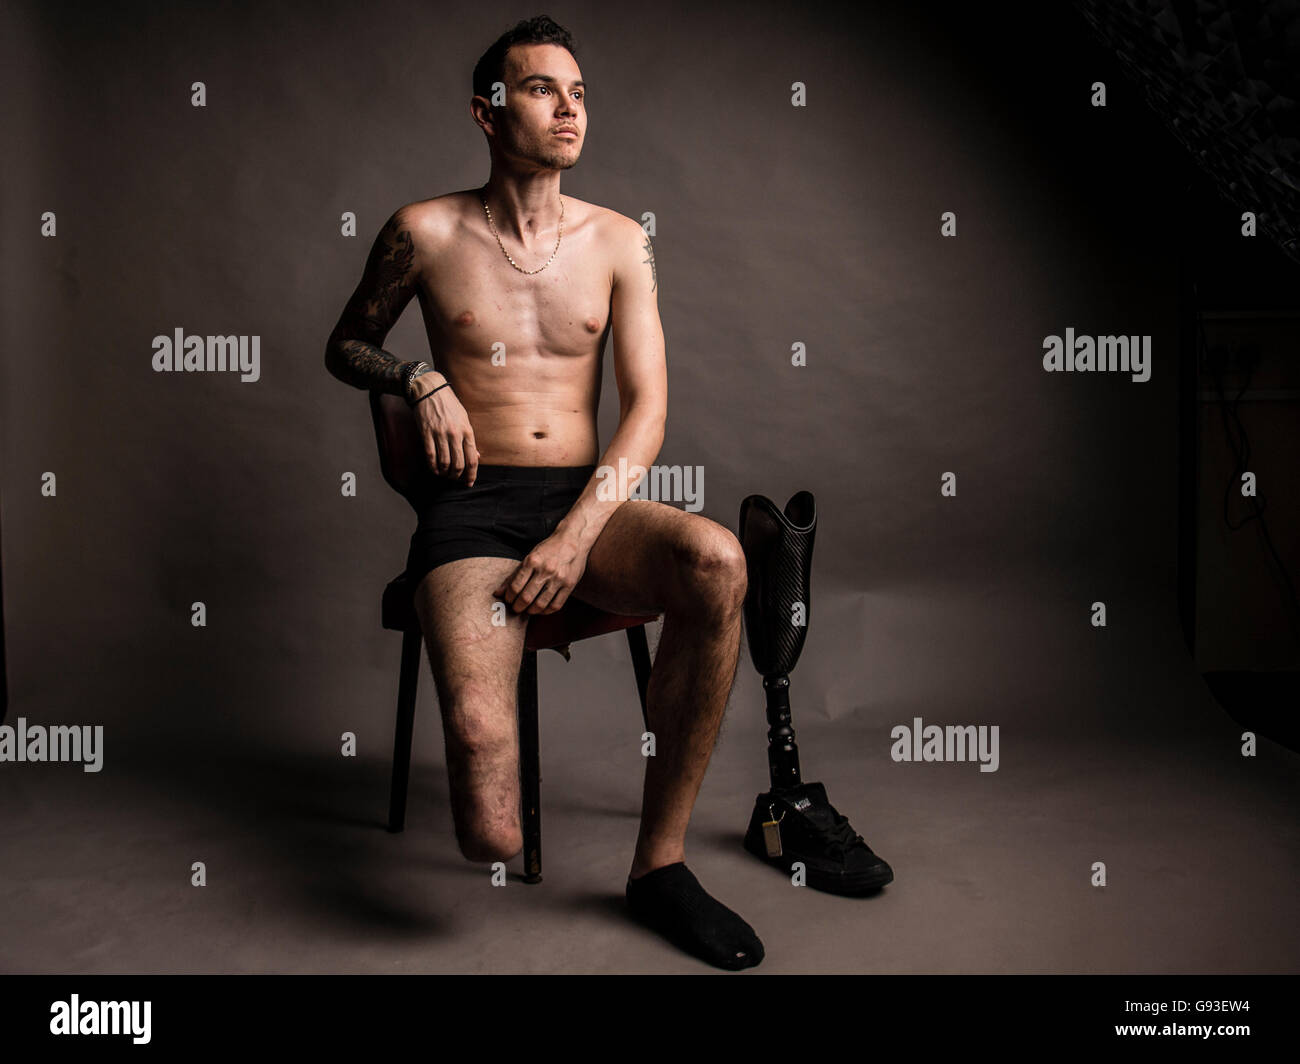 Jay, who has had his right leg amputated below the knee after a car  accident, with his prosthetic leg and foot. Studio portrait photography. UK  Stock Photo - Alamy